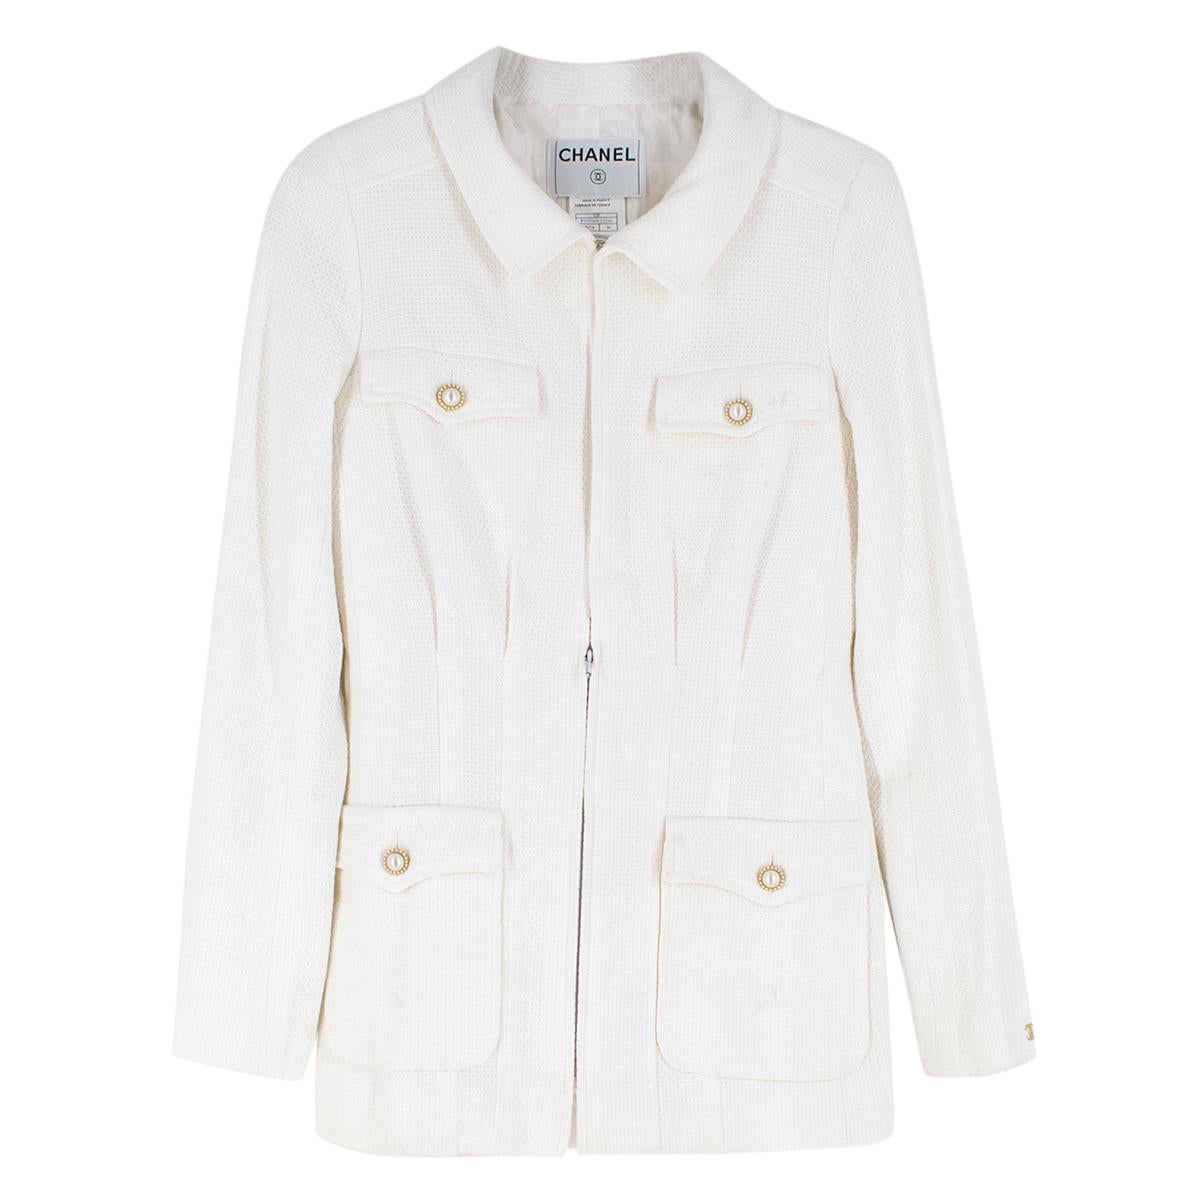 Chanel White Tweed Classic Jacket - Size US 4 In Excellent Condition For Sale In London, GB